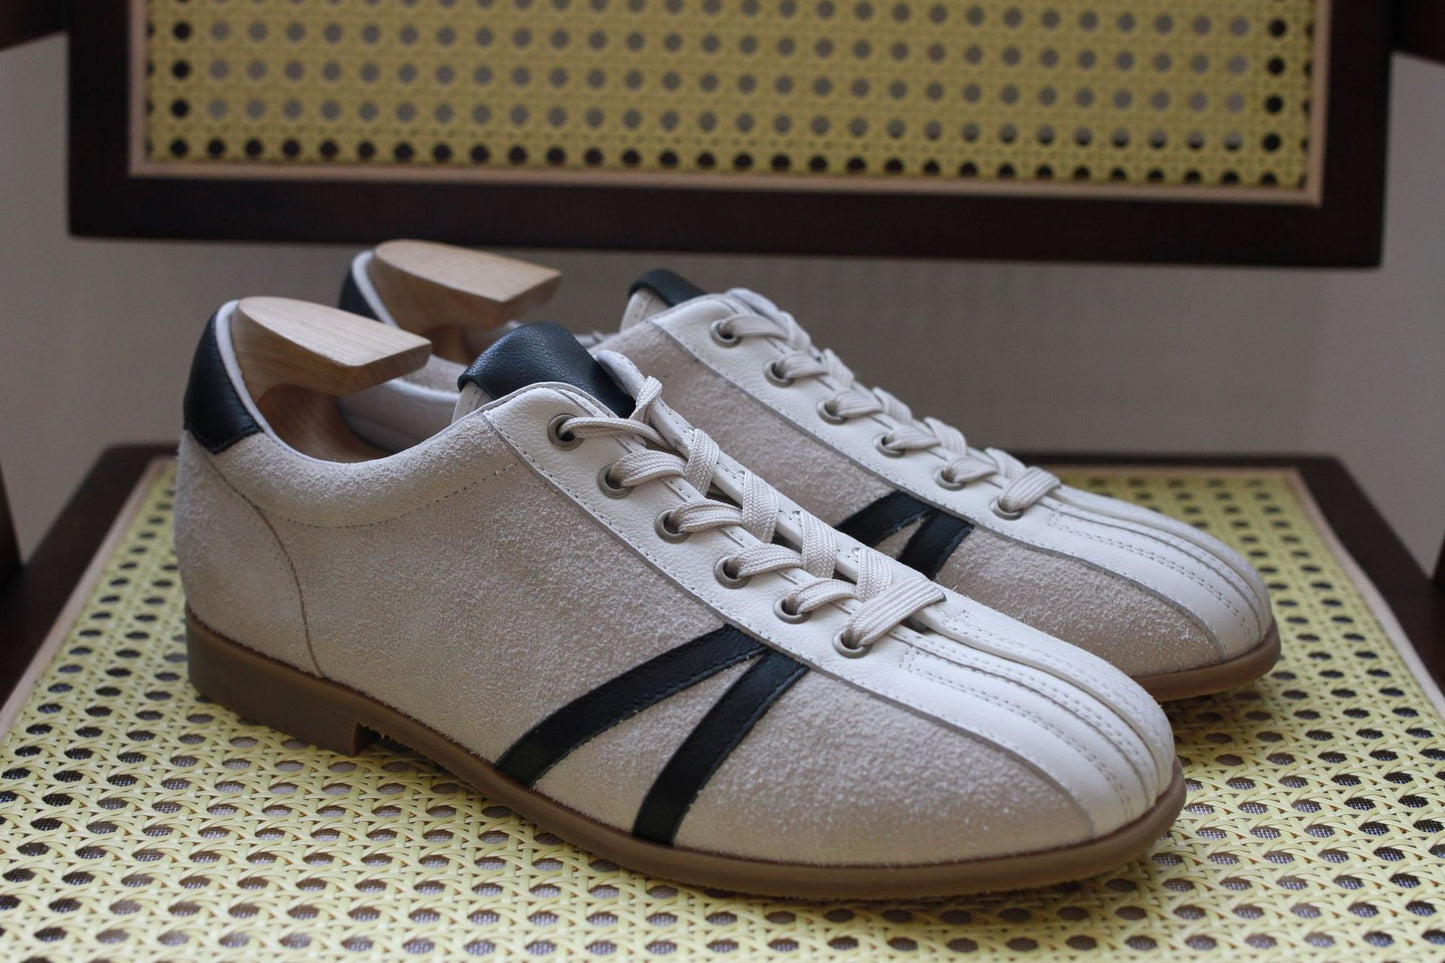 Men's Leather Bowling Shoes